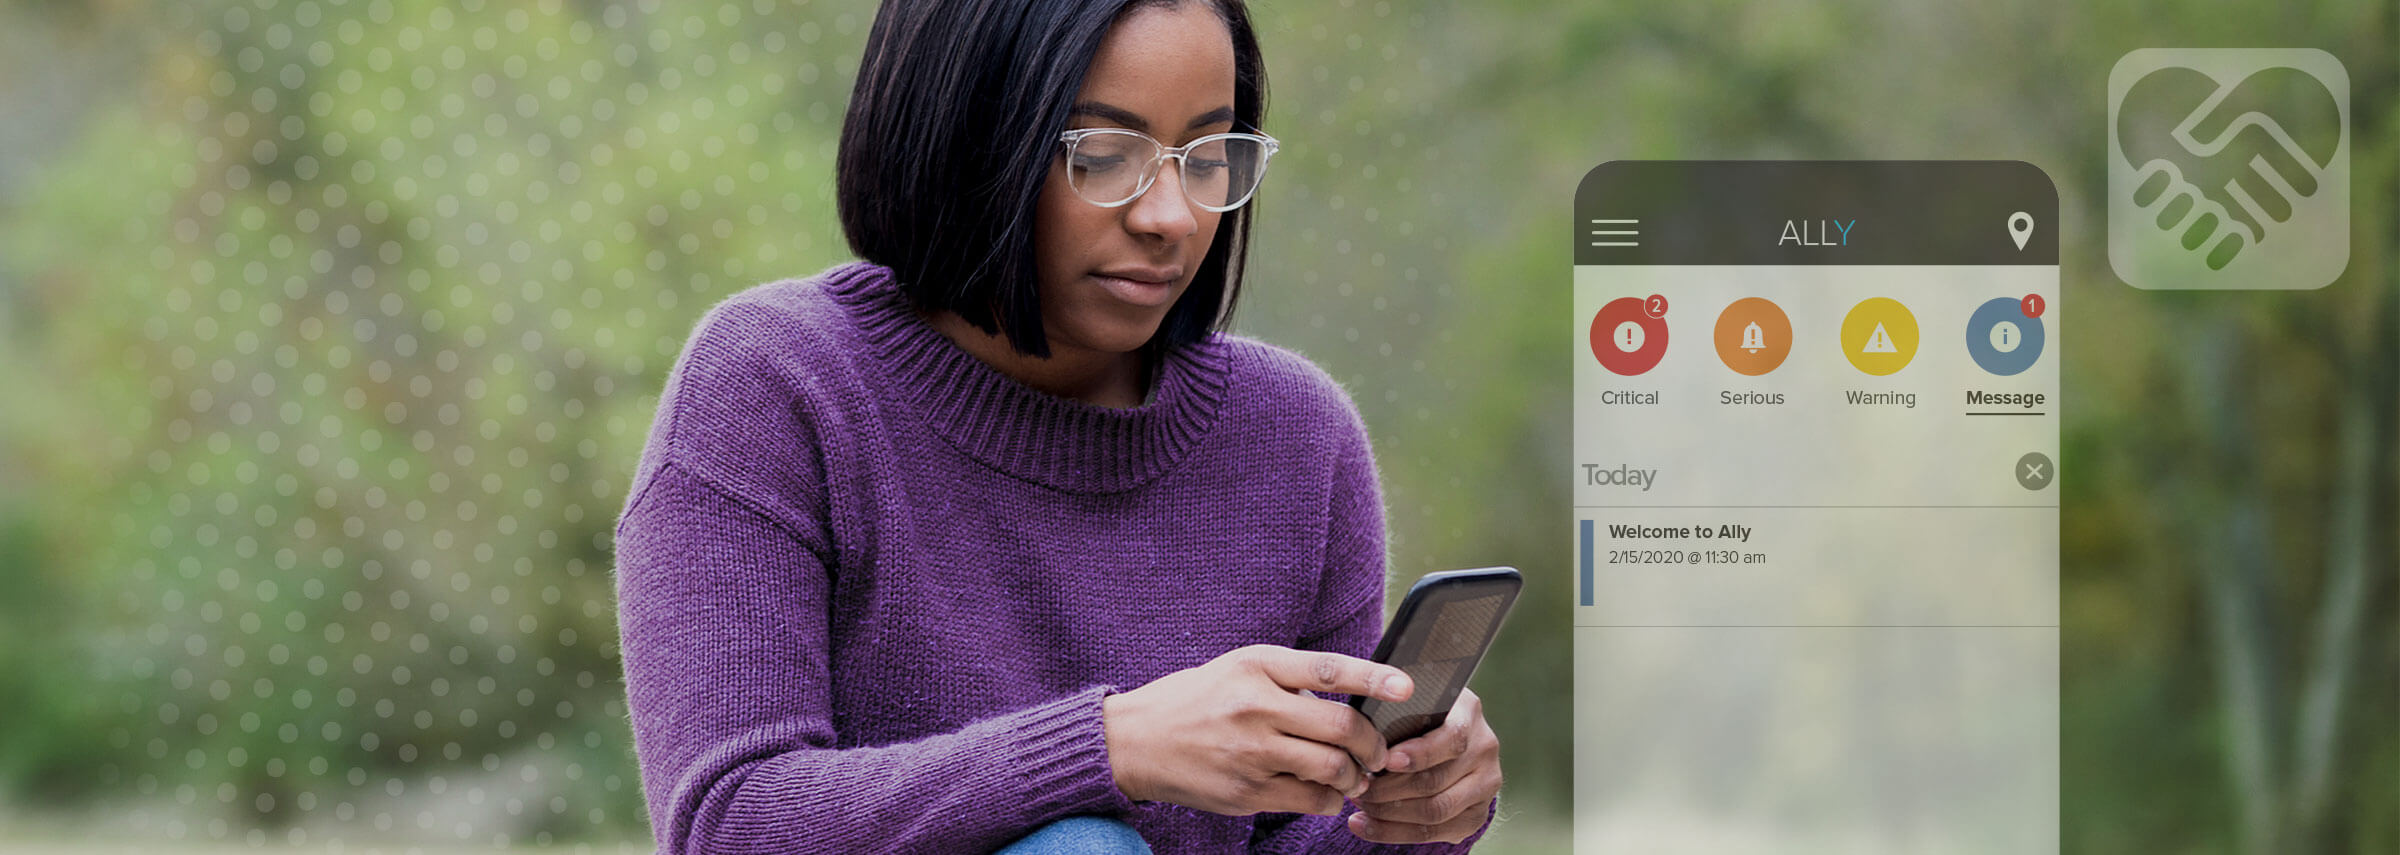 A young woman relies on a victim notification system mobile app to notify her if her safety is at risk.